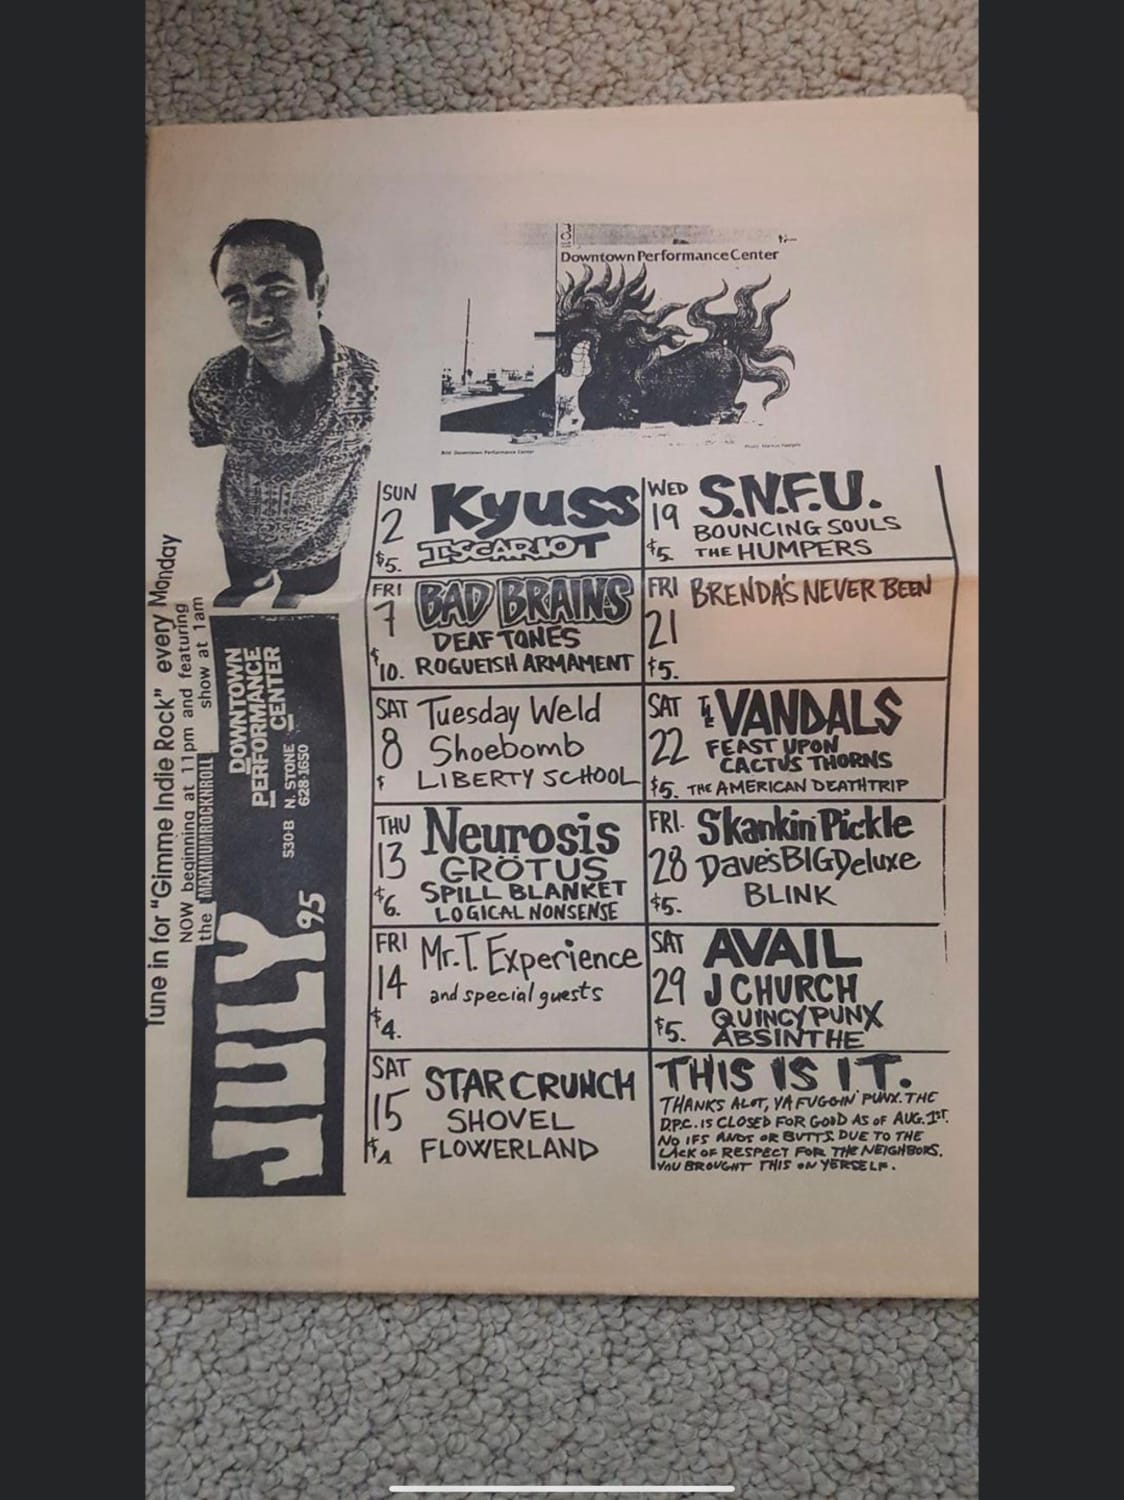 July 95 was a good m0nth in Tucson AZ. Went to most of these shows.